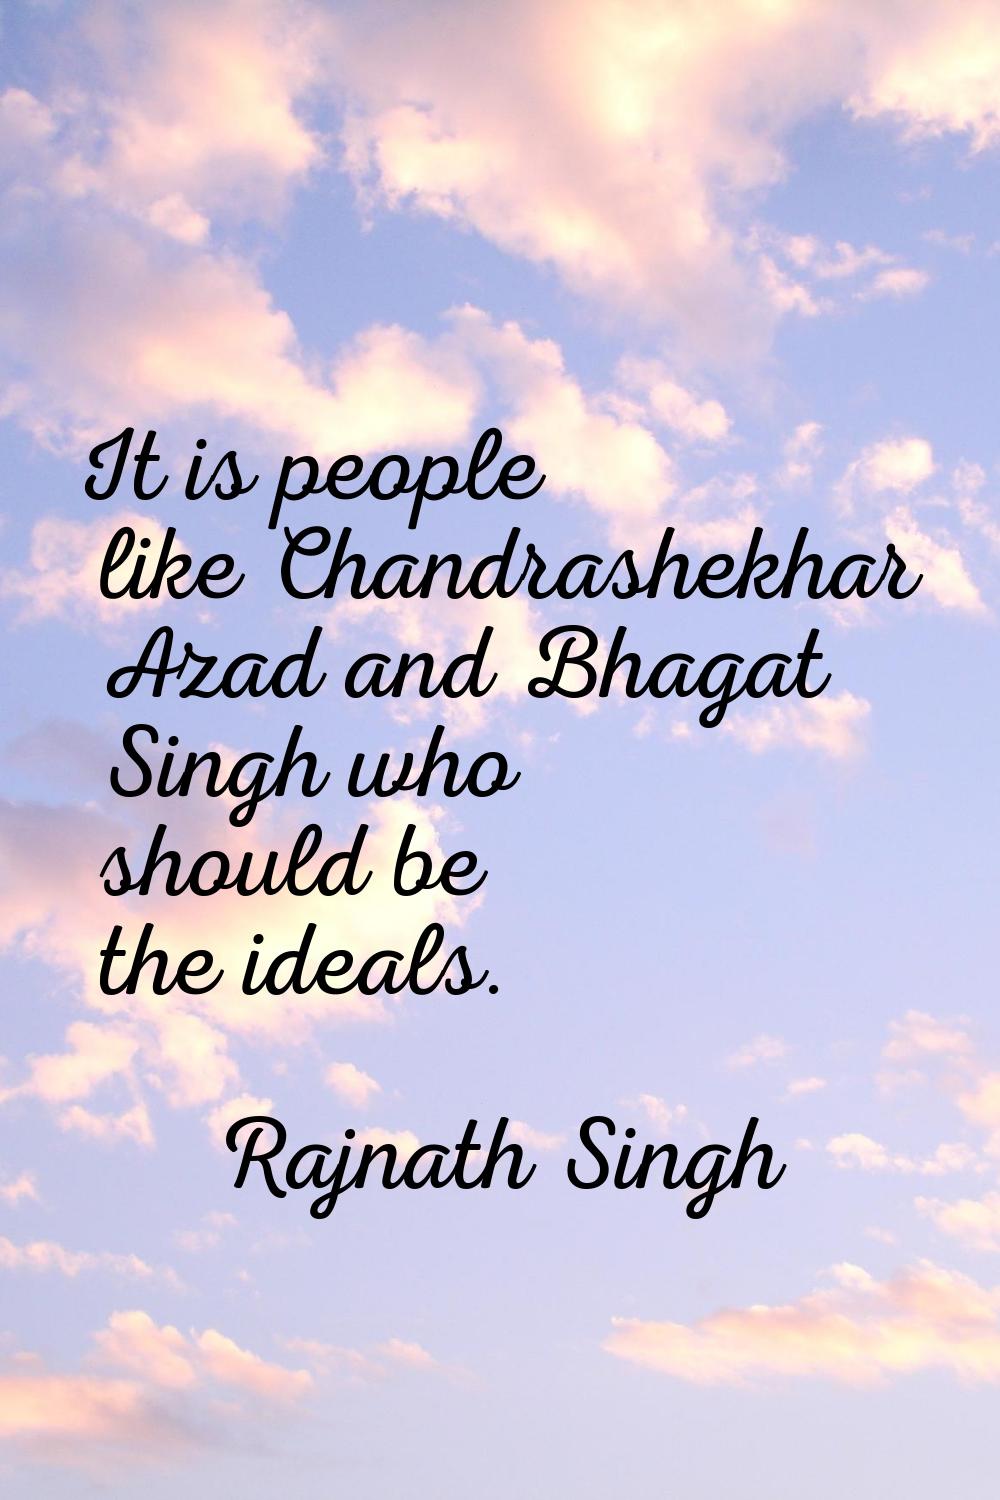 It is people like Chandrashekhar Azad and Bhagat Singh who should be the ideals.